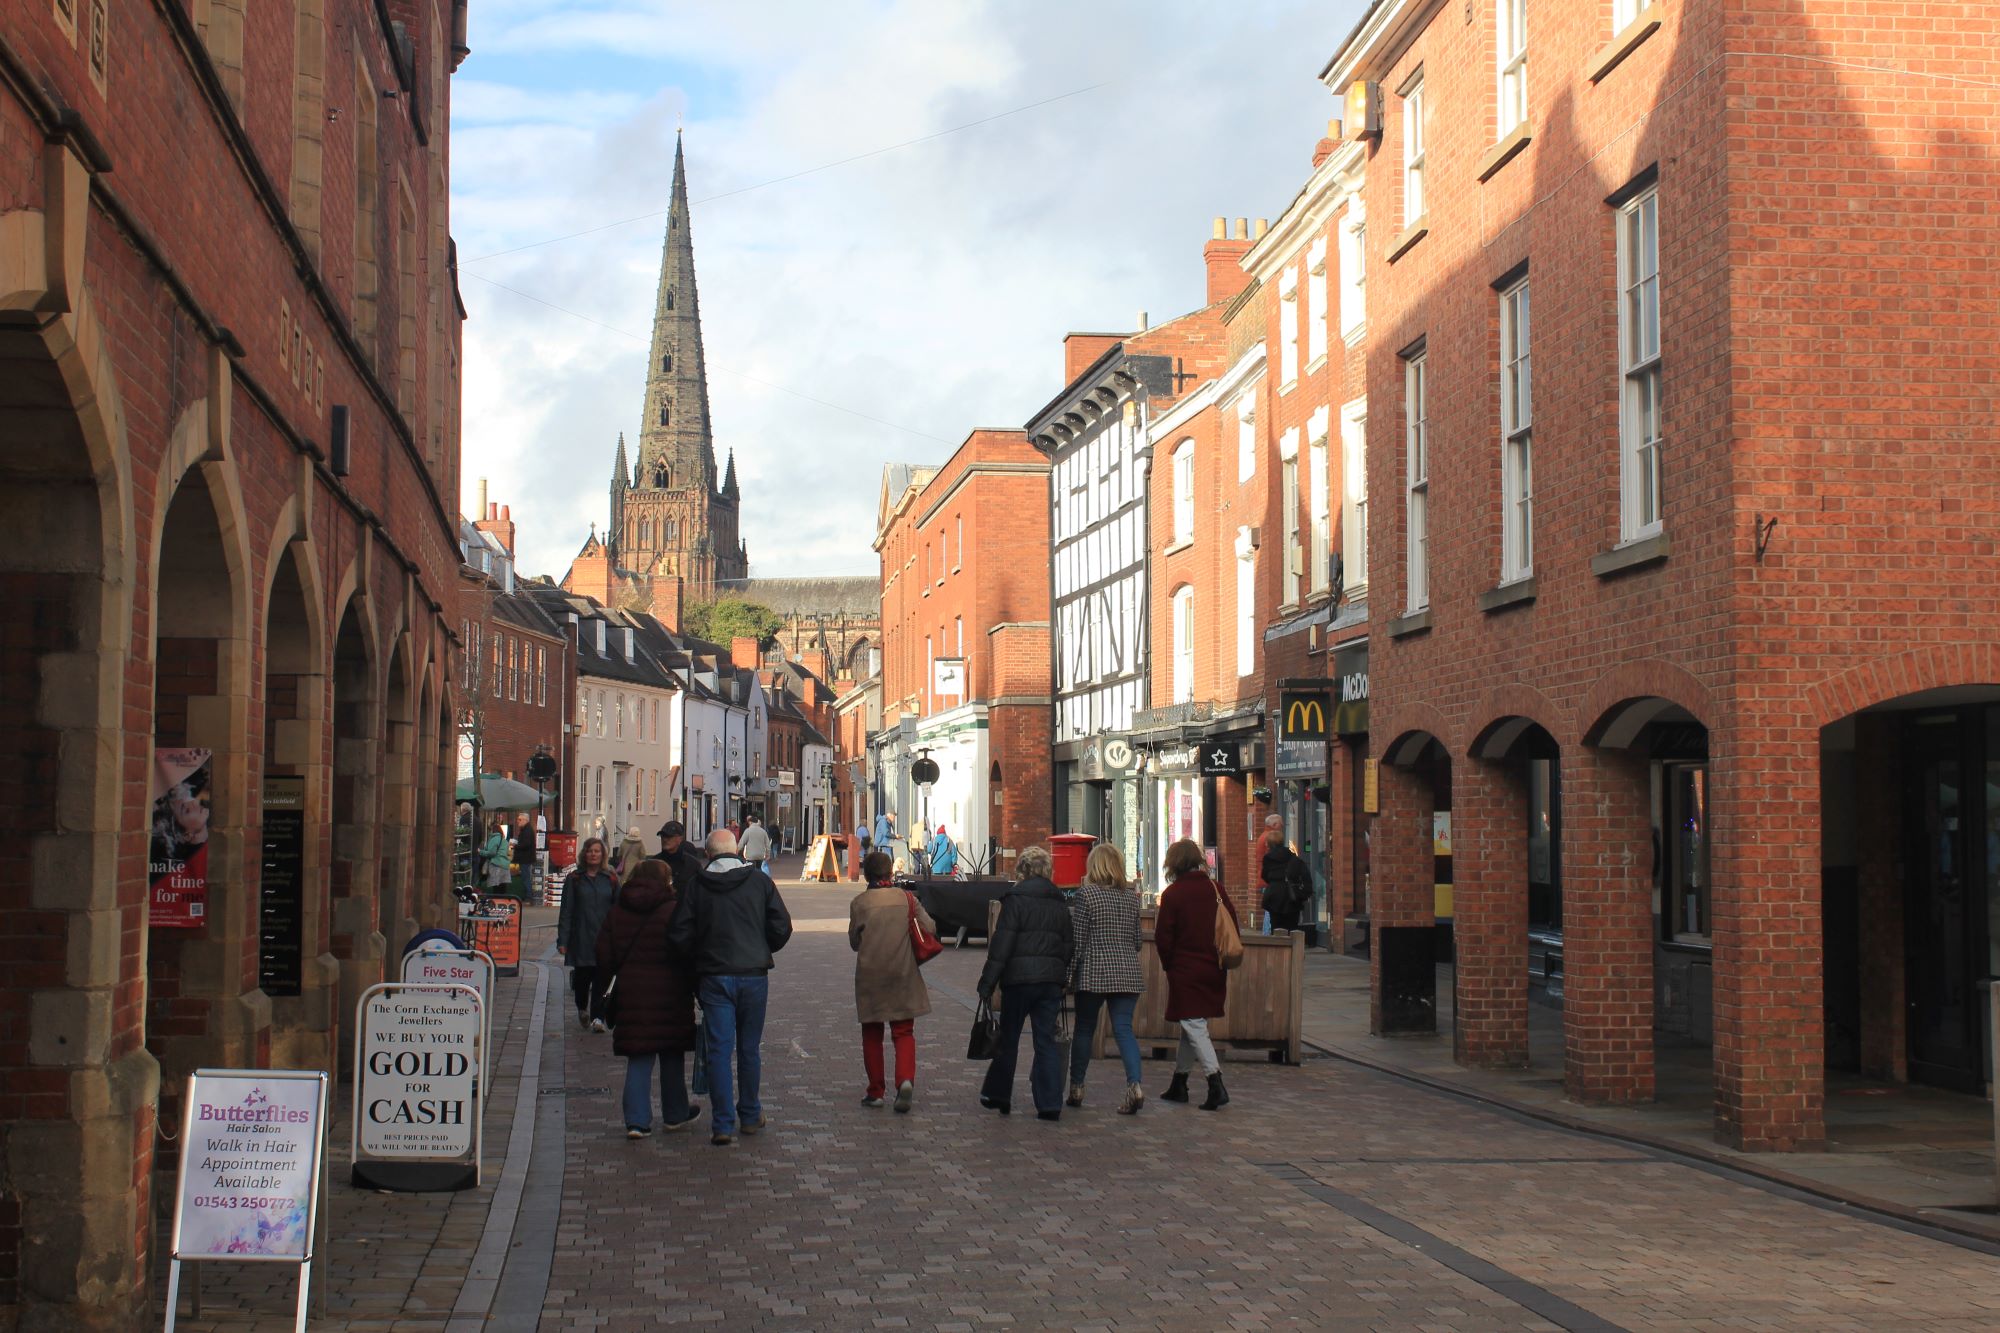 People walking in the pedestrianised area in Lichfield city centre.